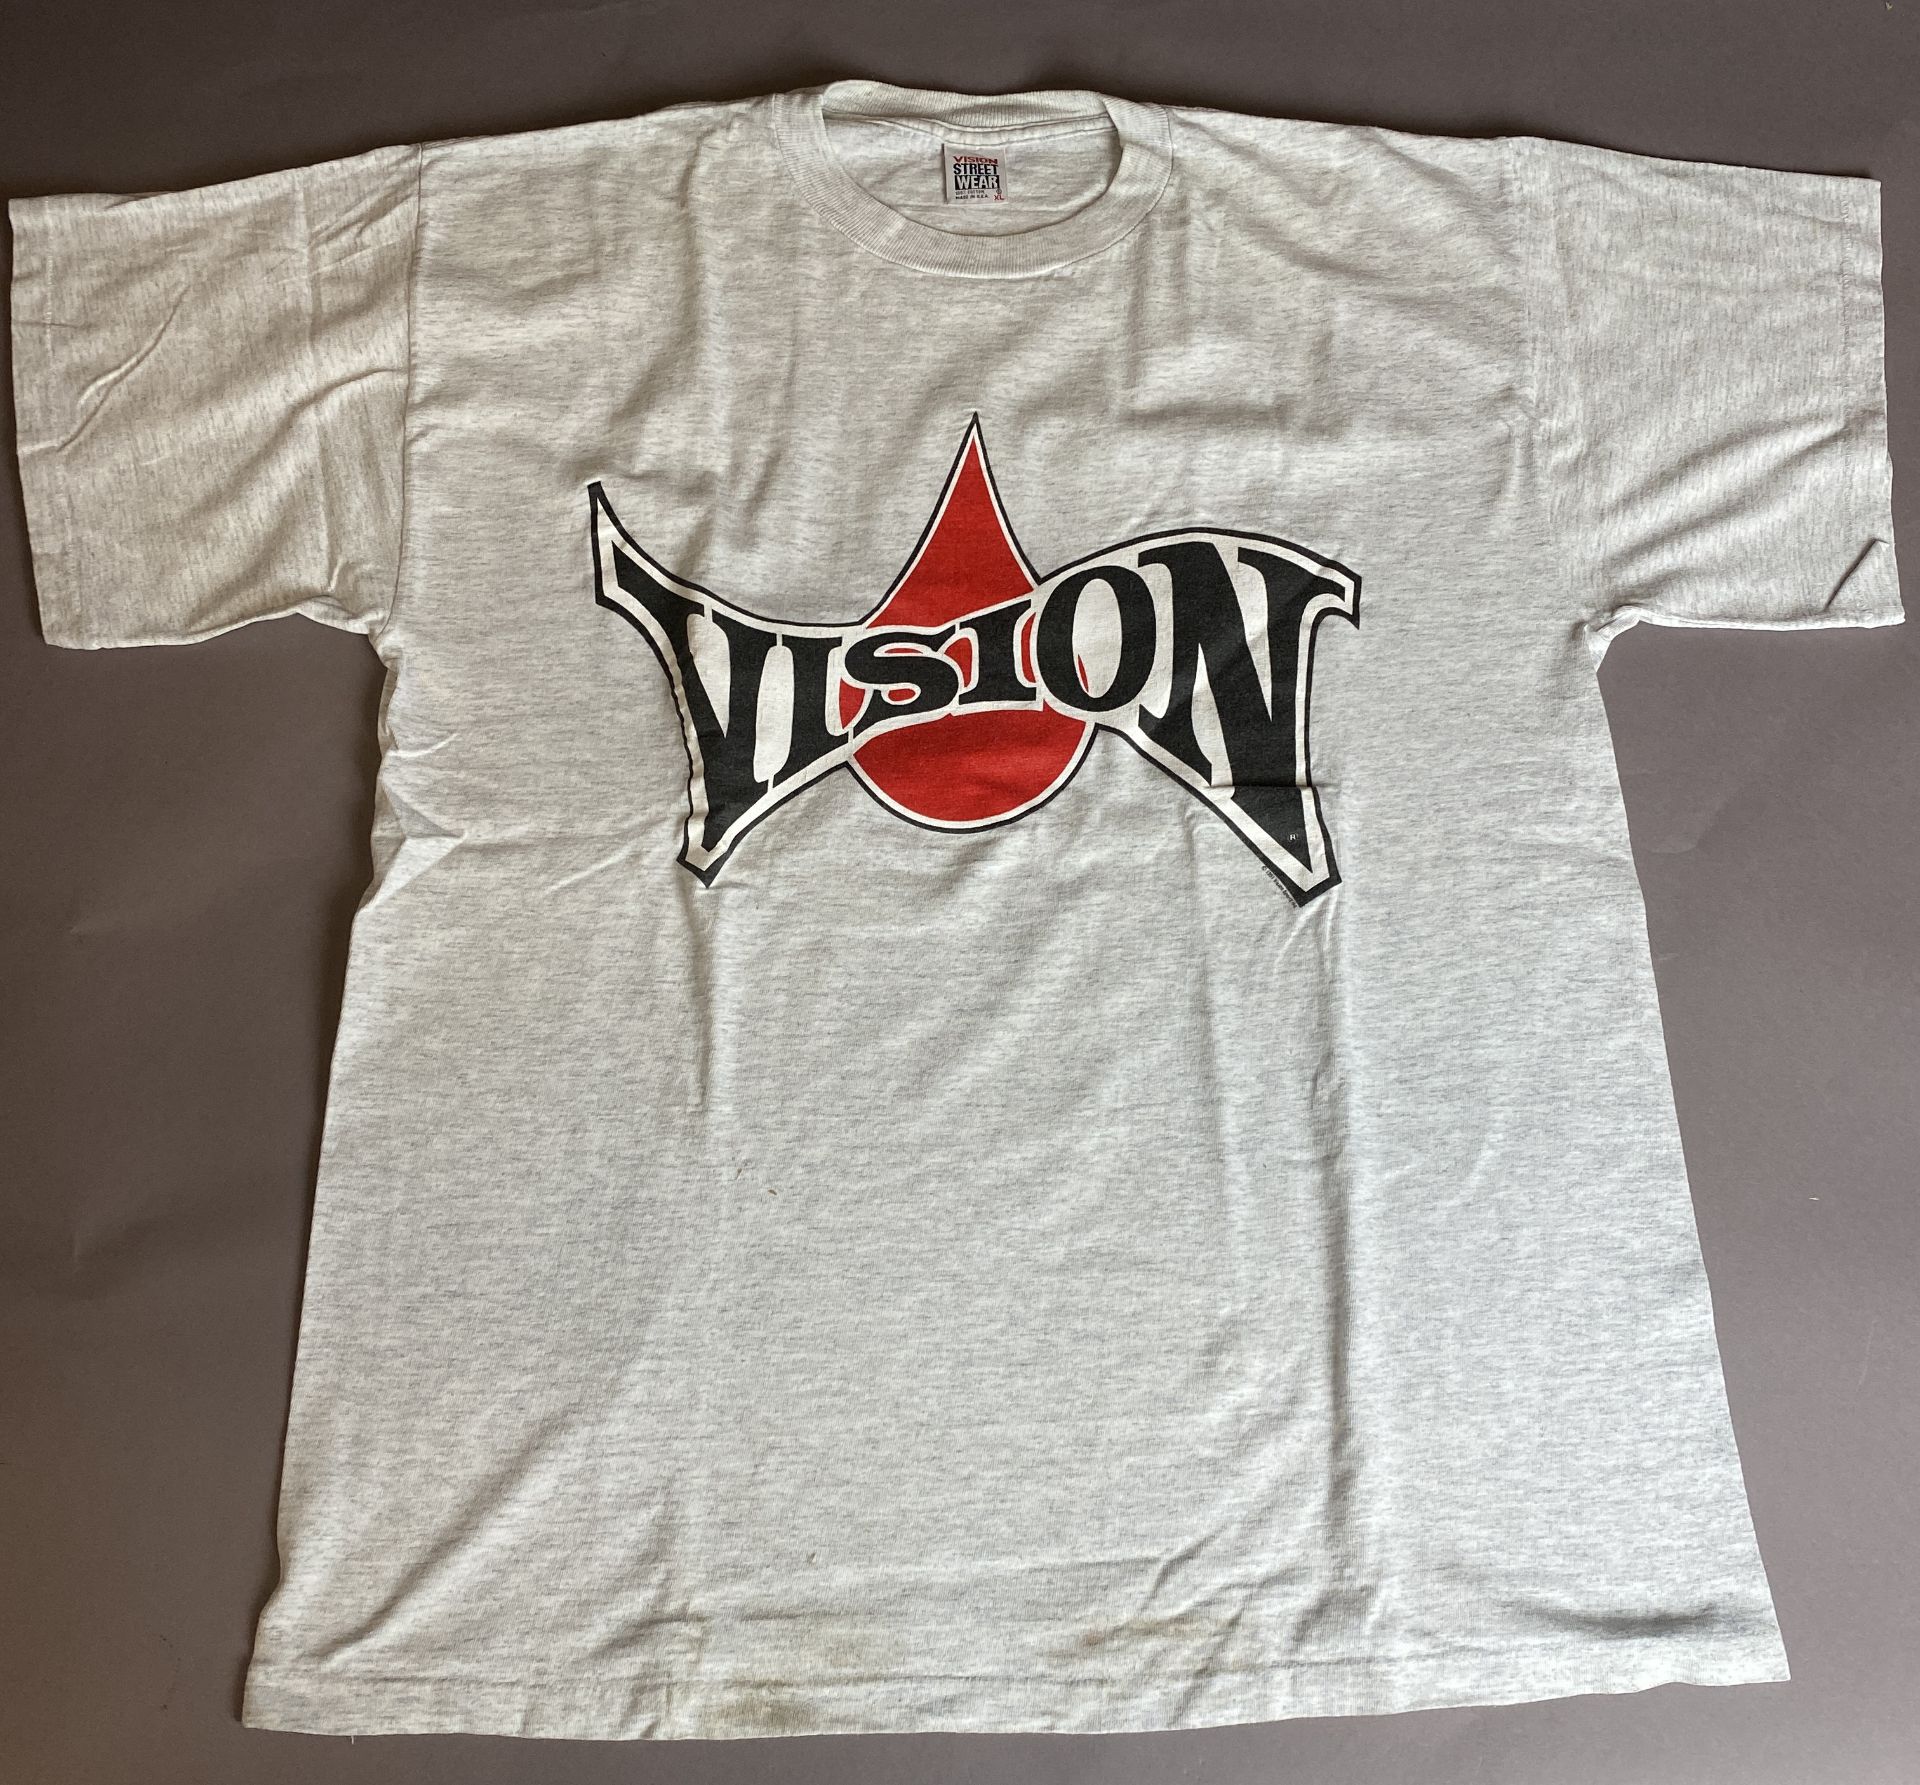 27 x Assorted Vintage 1990s T-shirts inc. - Image 12 of 30